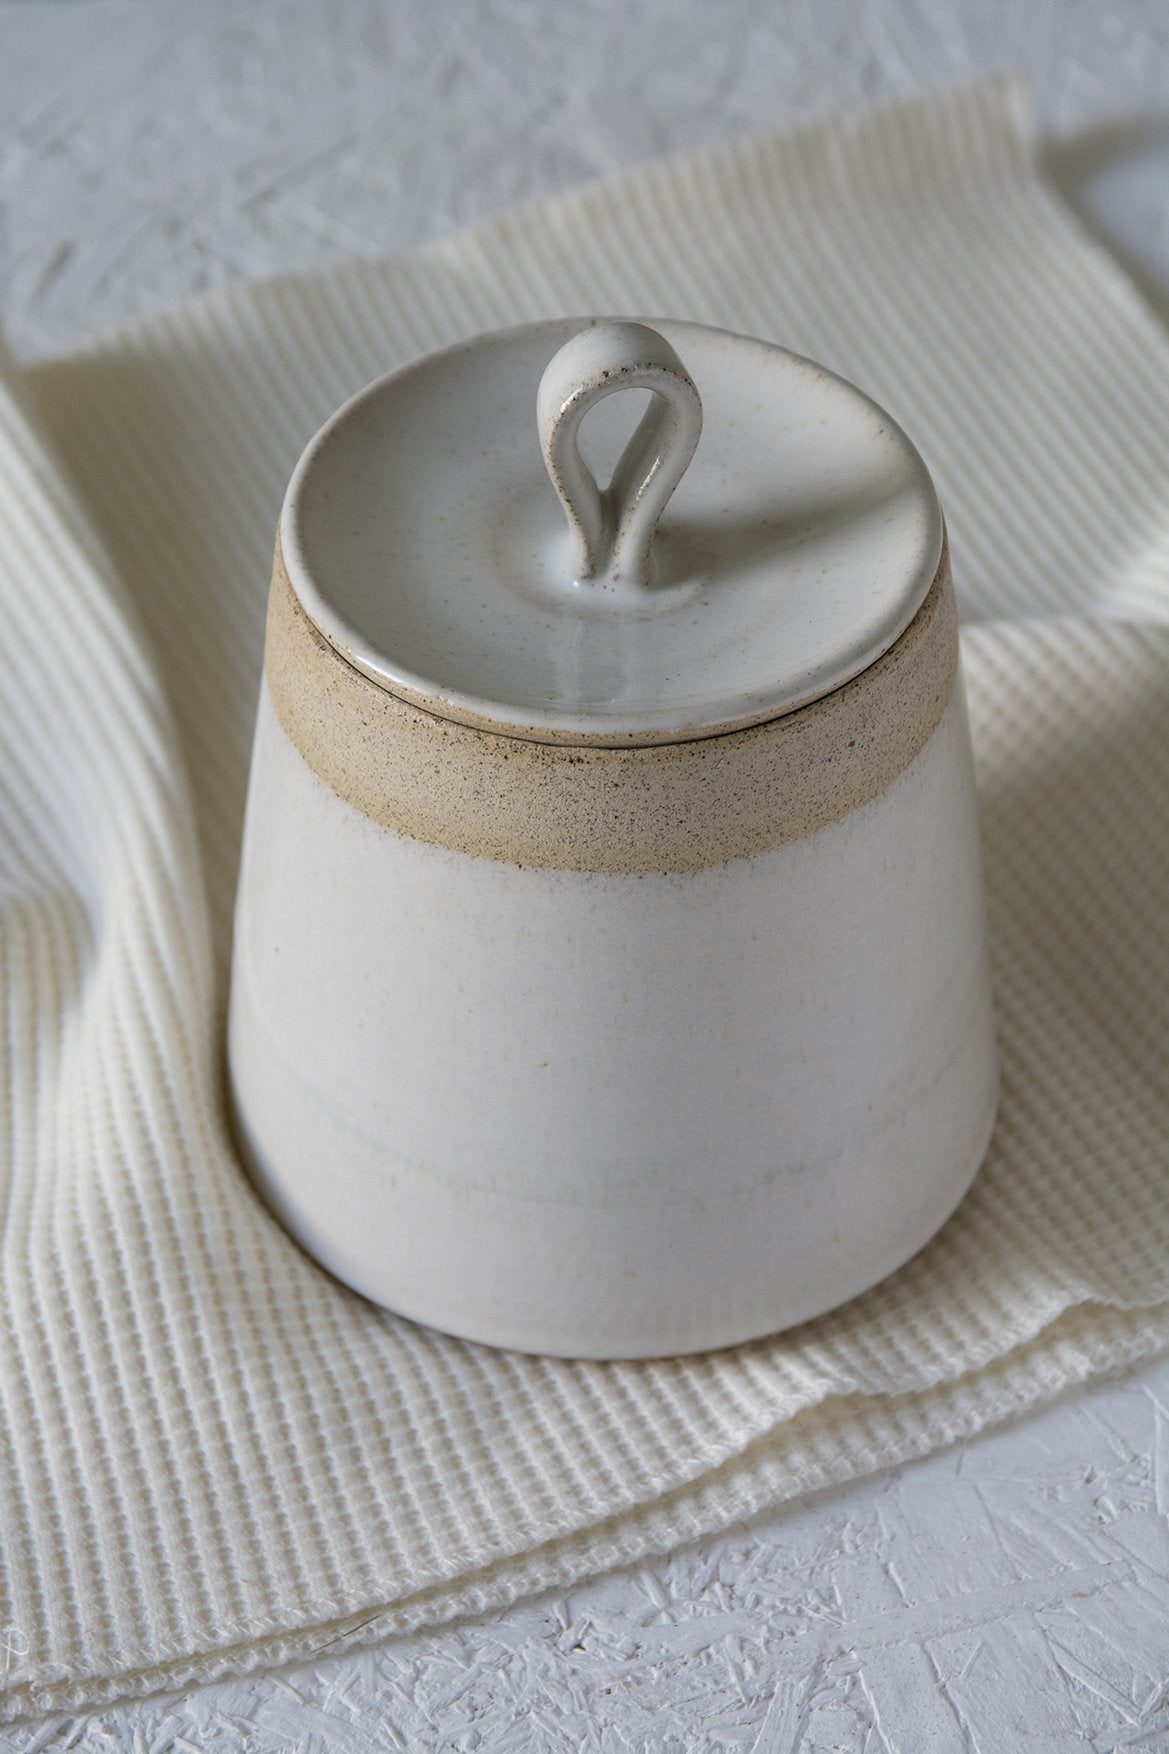 Handmade Ceramic Kitchen Canister – Mad About Pottery